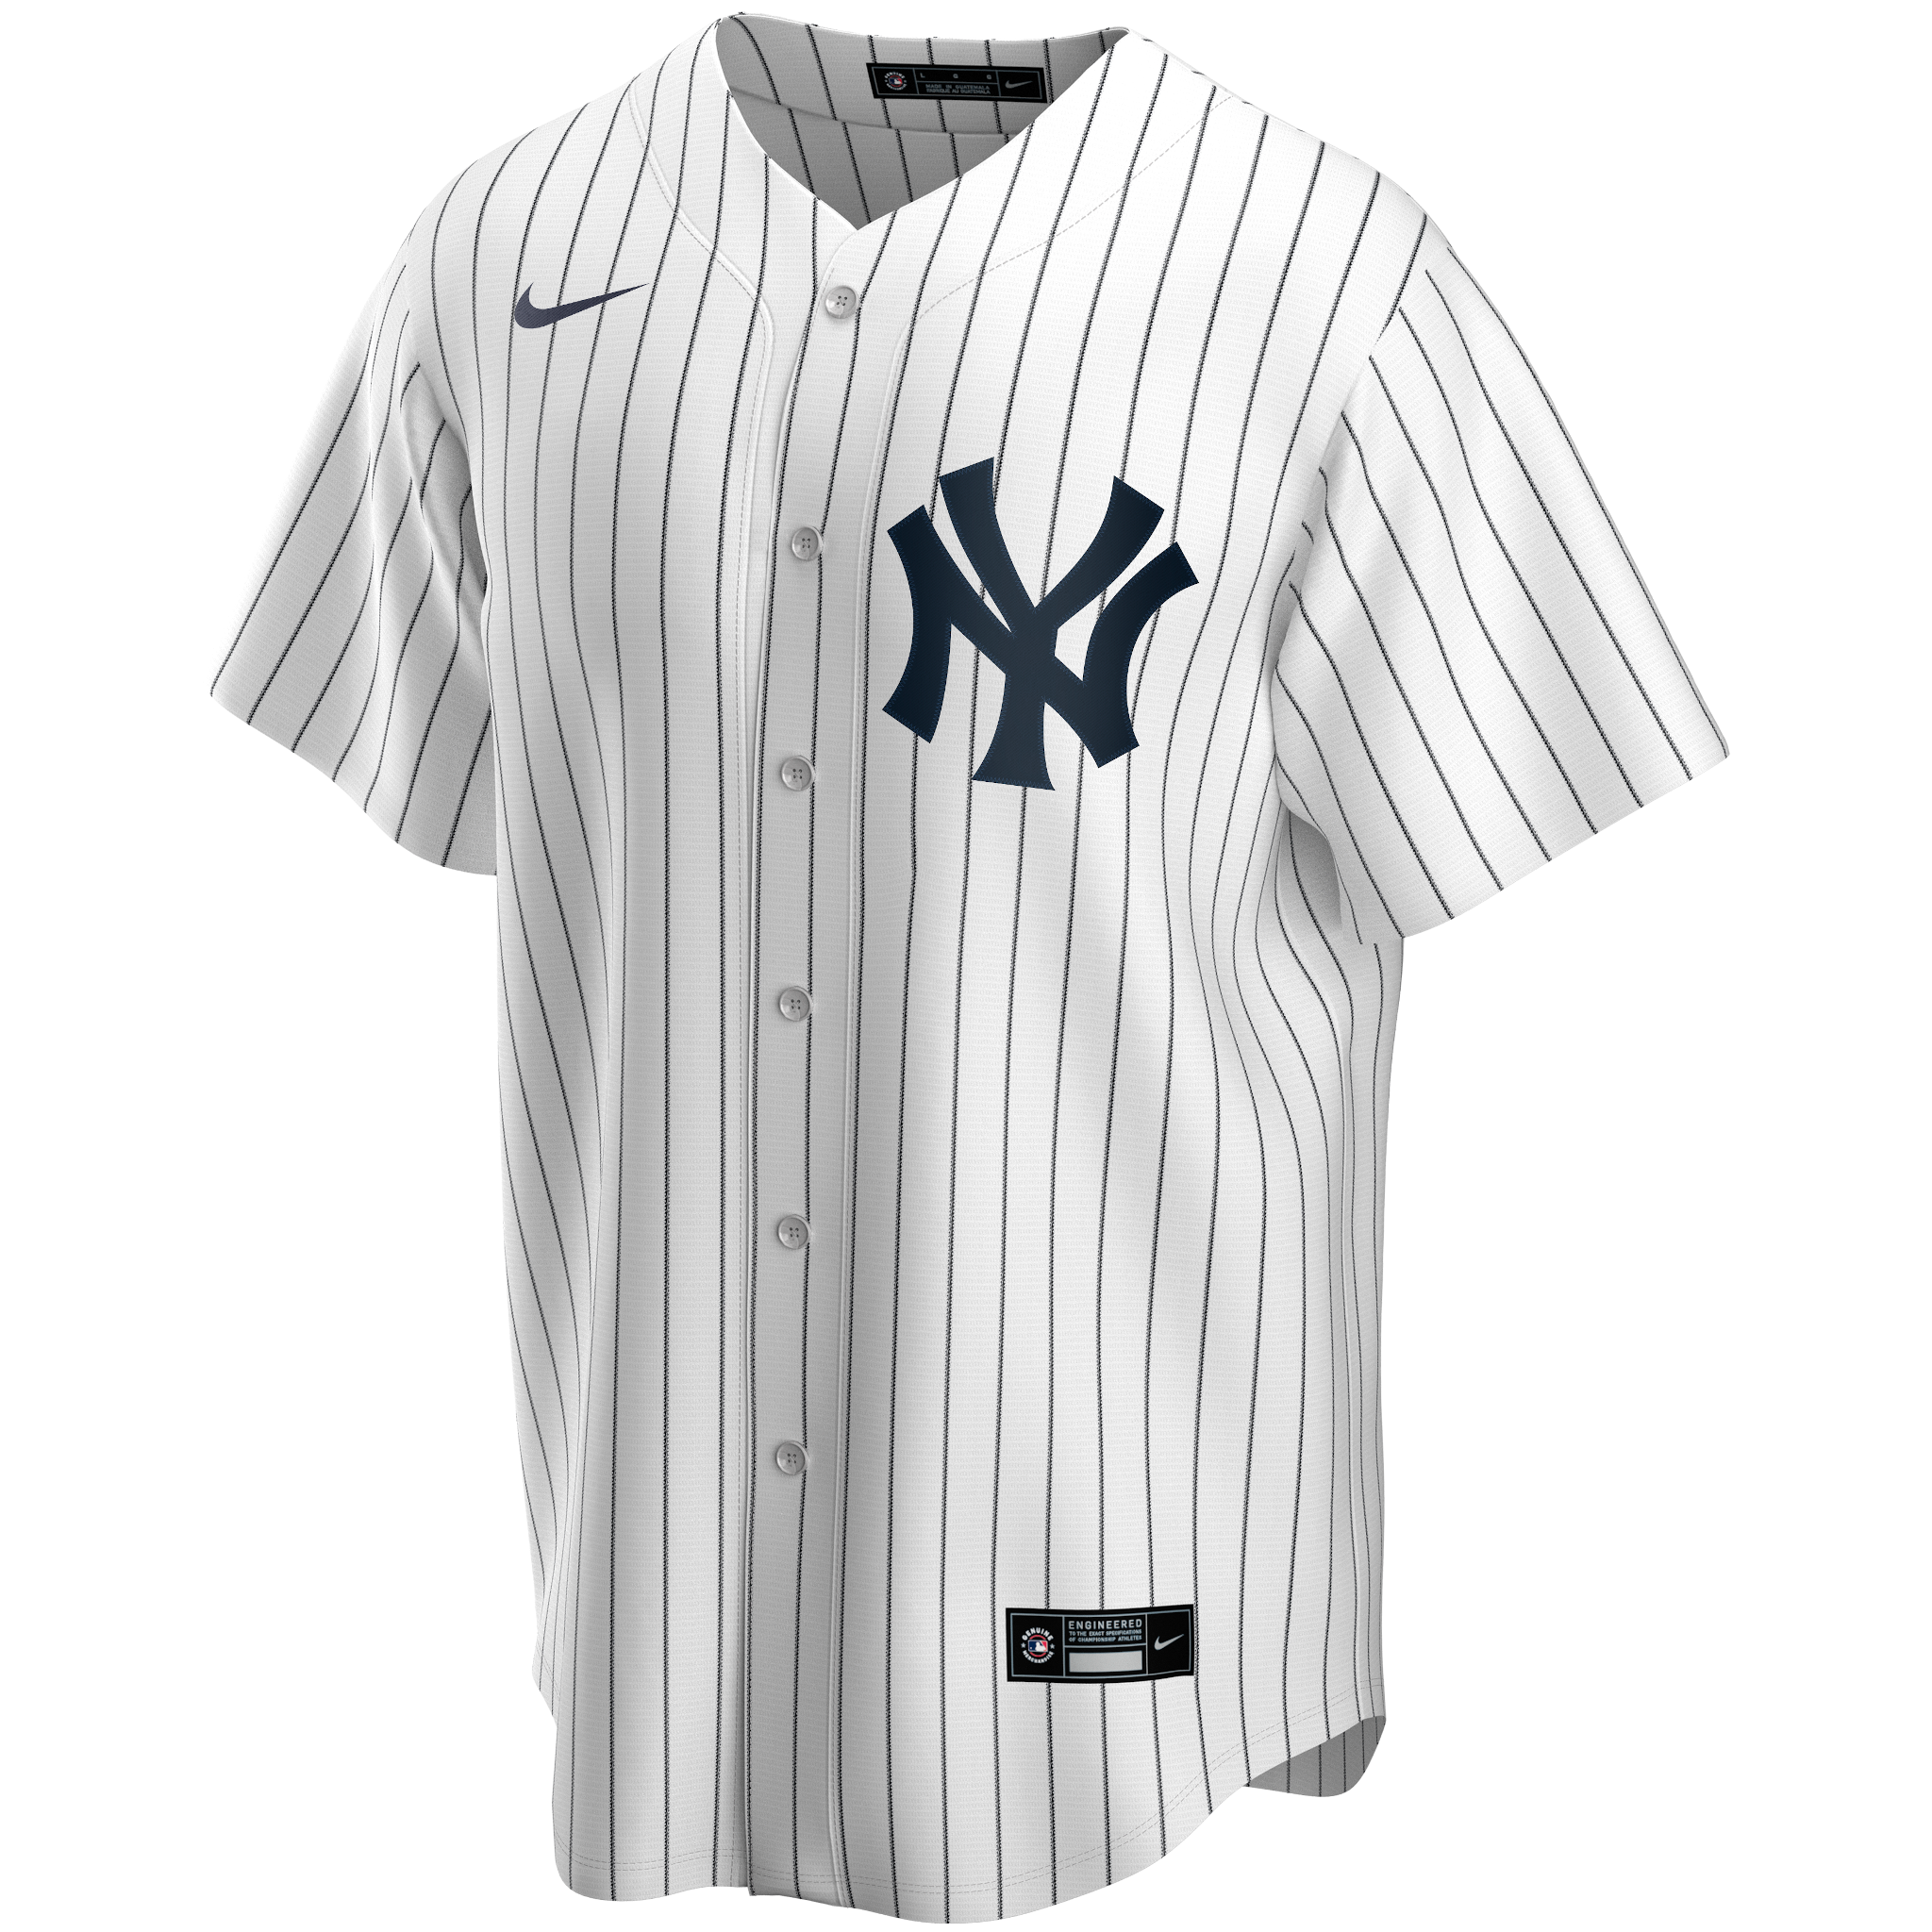 Crawford Family Charity Auction for ALS Research - Autographed Authentic  Jersey signed by New York Yankees Starting Pitcher #45 Gerrit Cole.